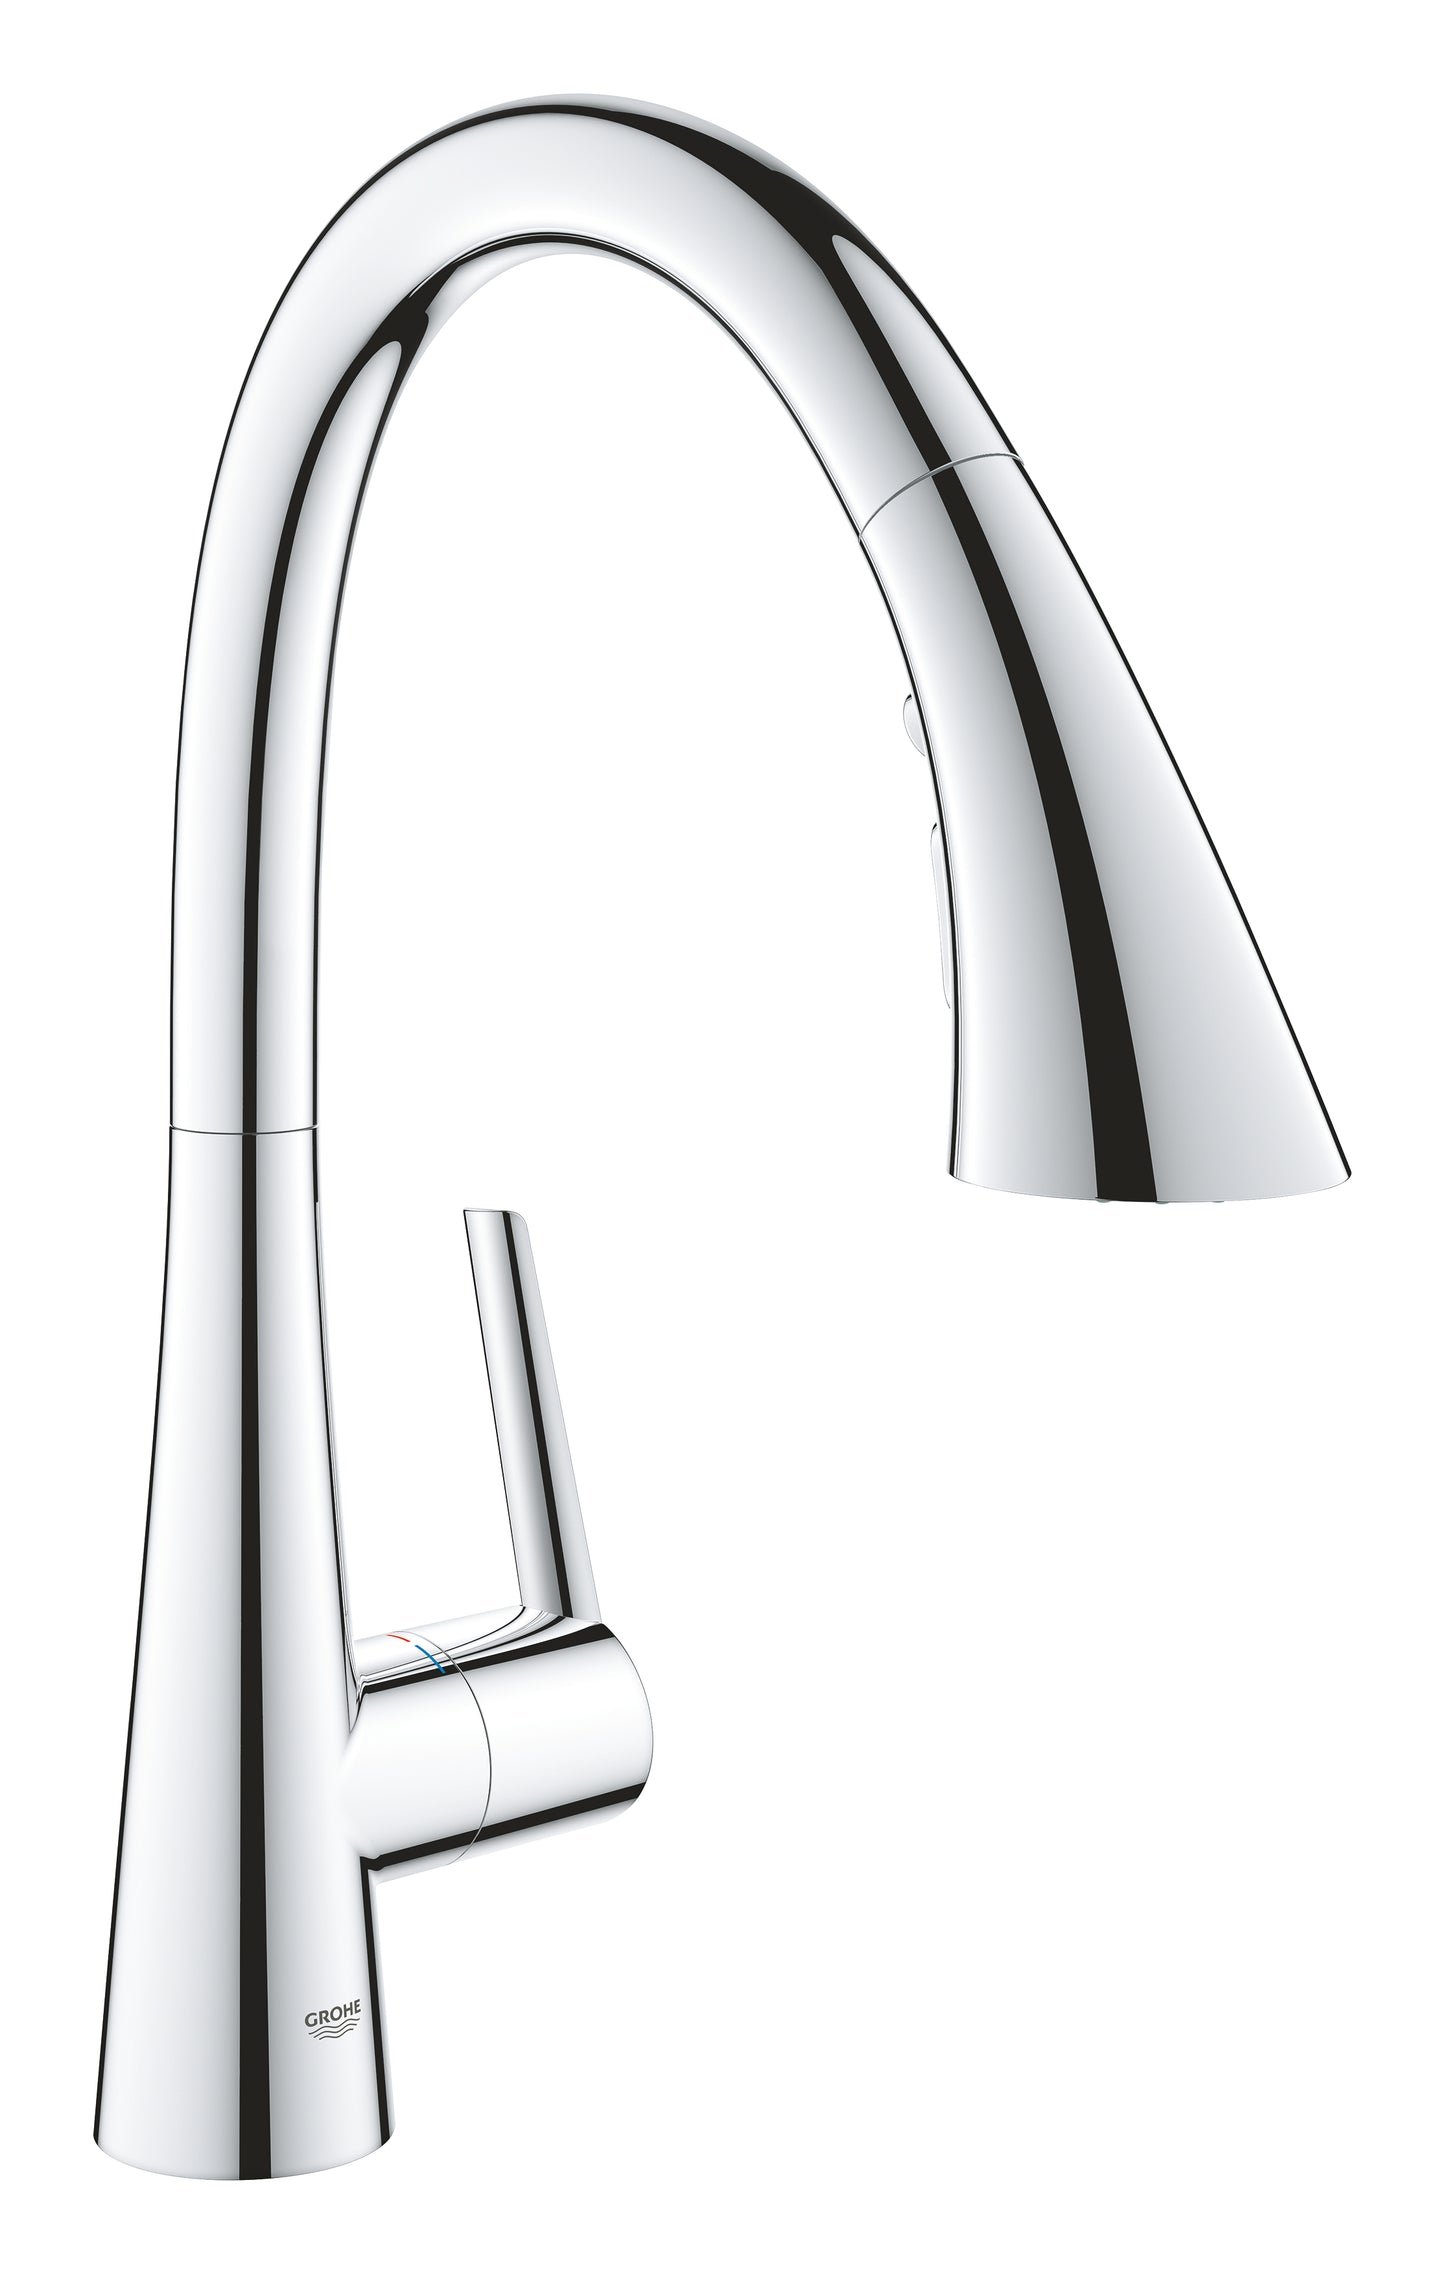 GROHE 32298003 Grohe Zedra Chrome Single-Handle Pull Down Kitchen Faucet Triple Spray 1.75 GPM